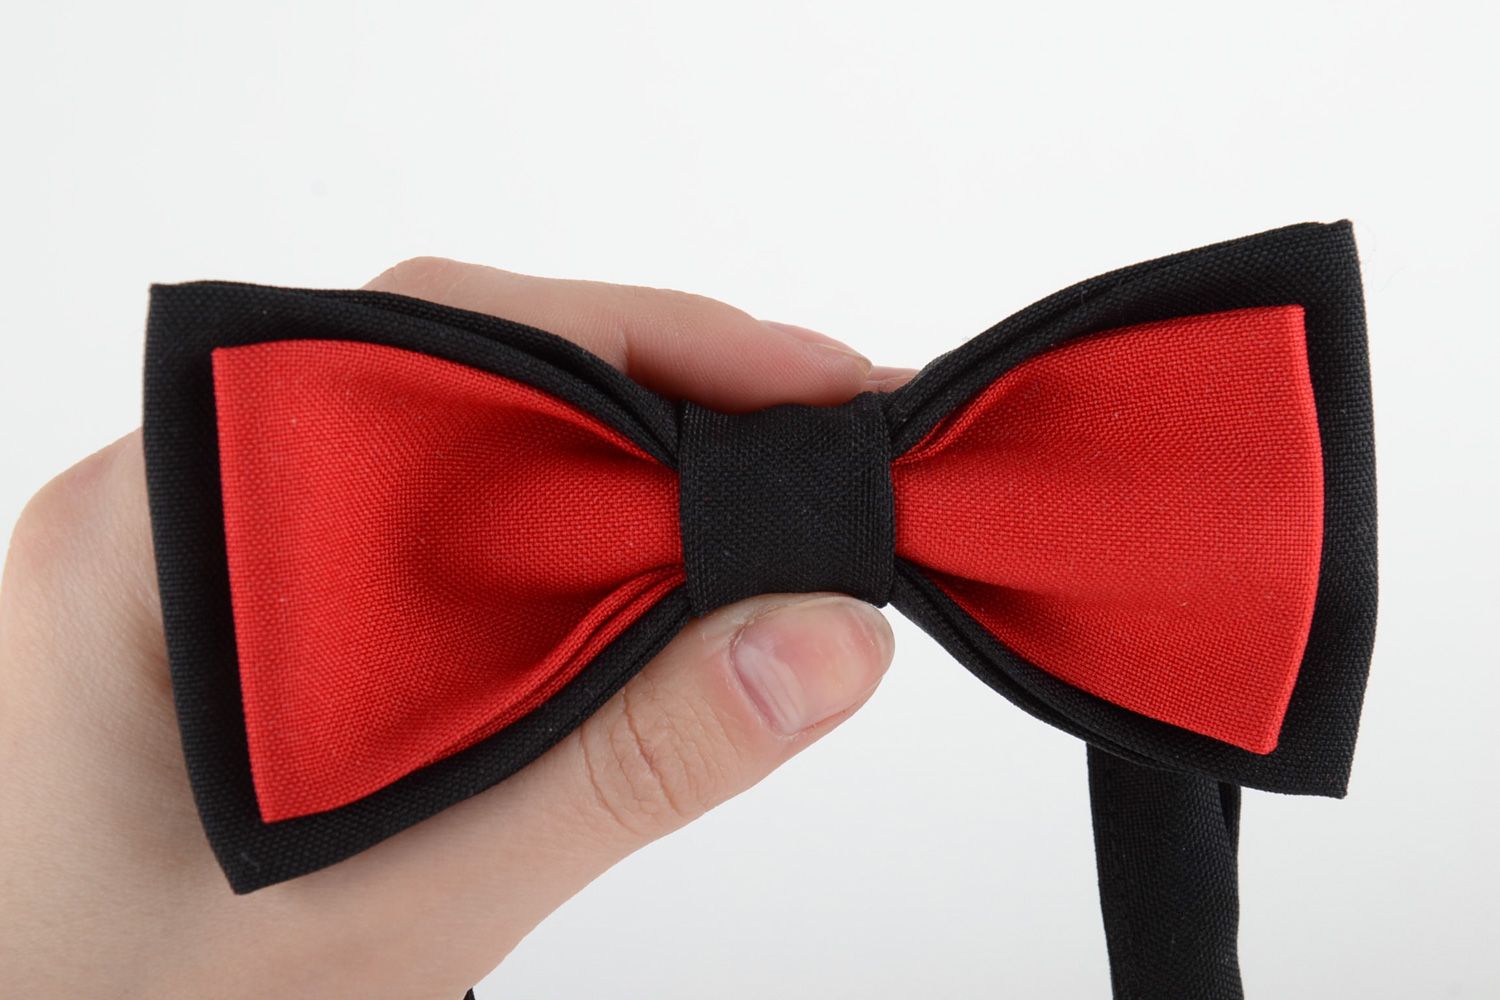 Handmade stylish bow tie sewn of red and black costume fabric for extravagant men photo 5